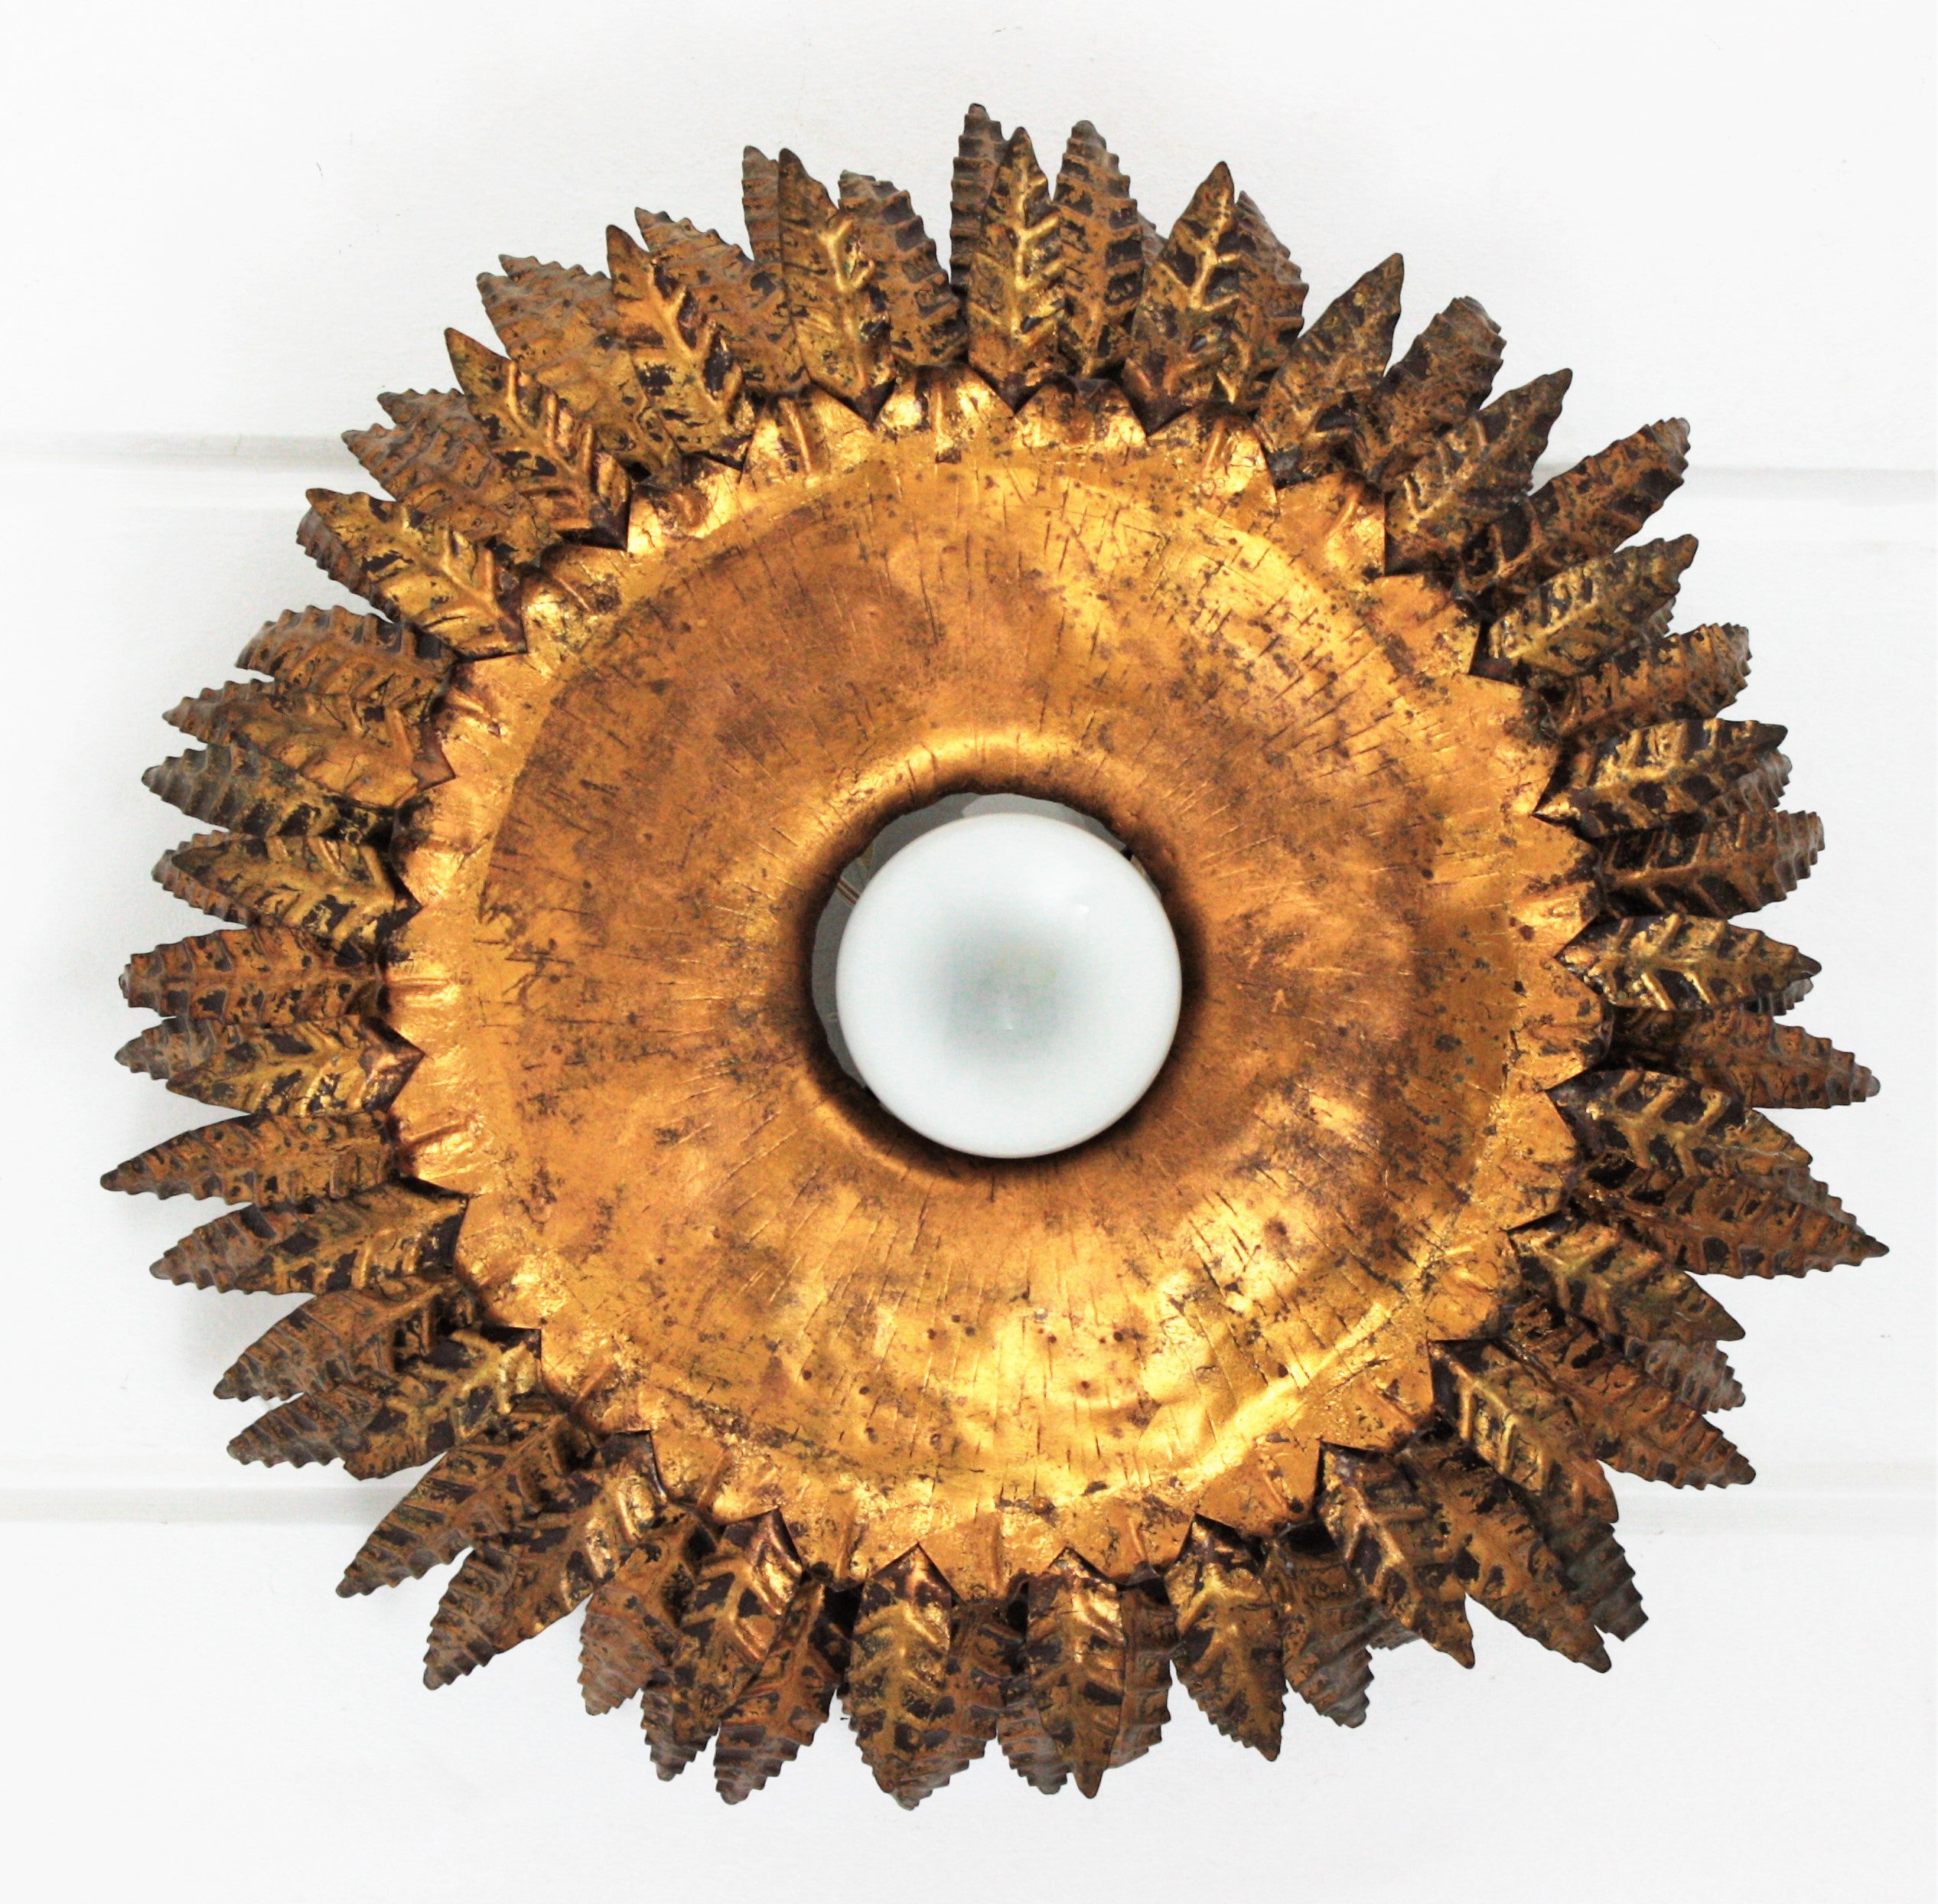 Outstanding triple layered sunburst ceiling flush mount in gold gilt iron. Spain, 1950s.
This sunburst flushmount was entirely made by hand. It has a beautiful Brutalist design with handcut details and three layers of hammered and gilded iron leaves